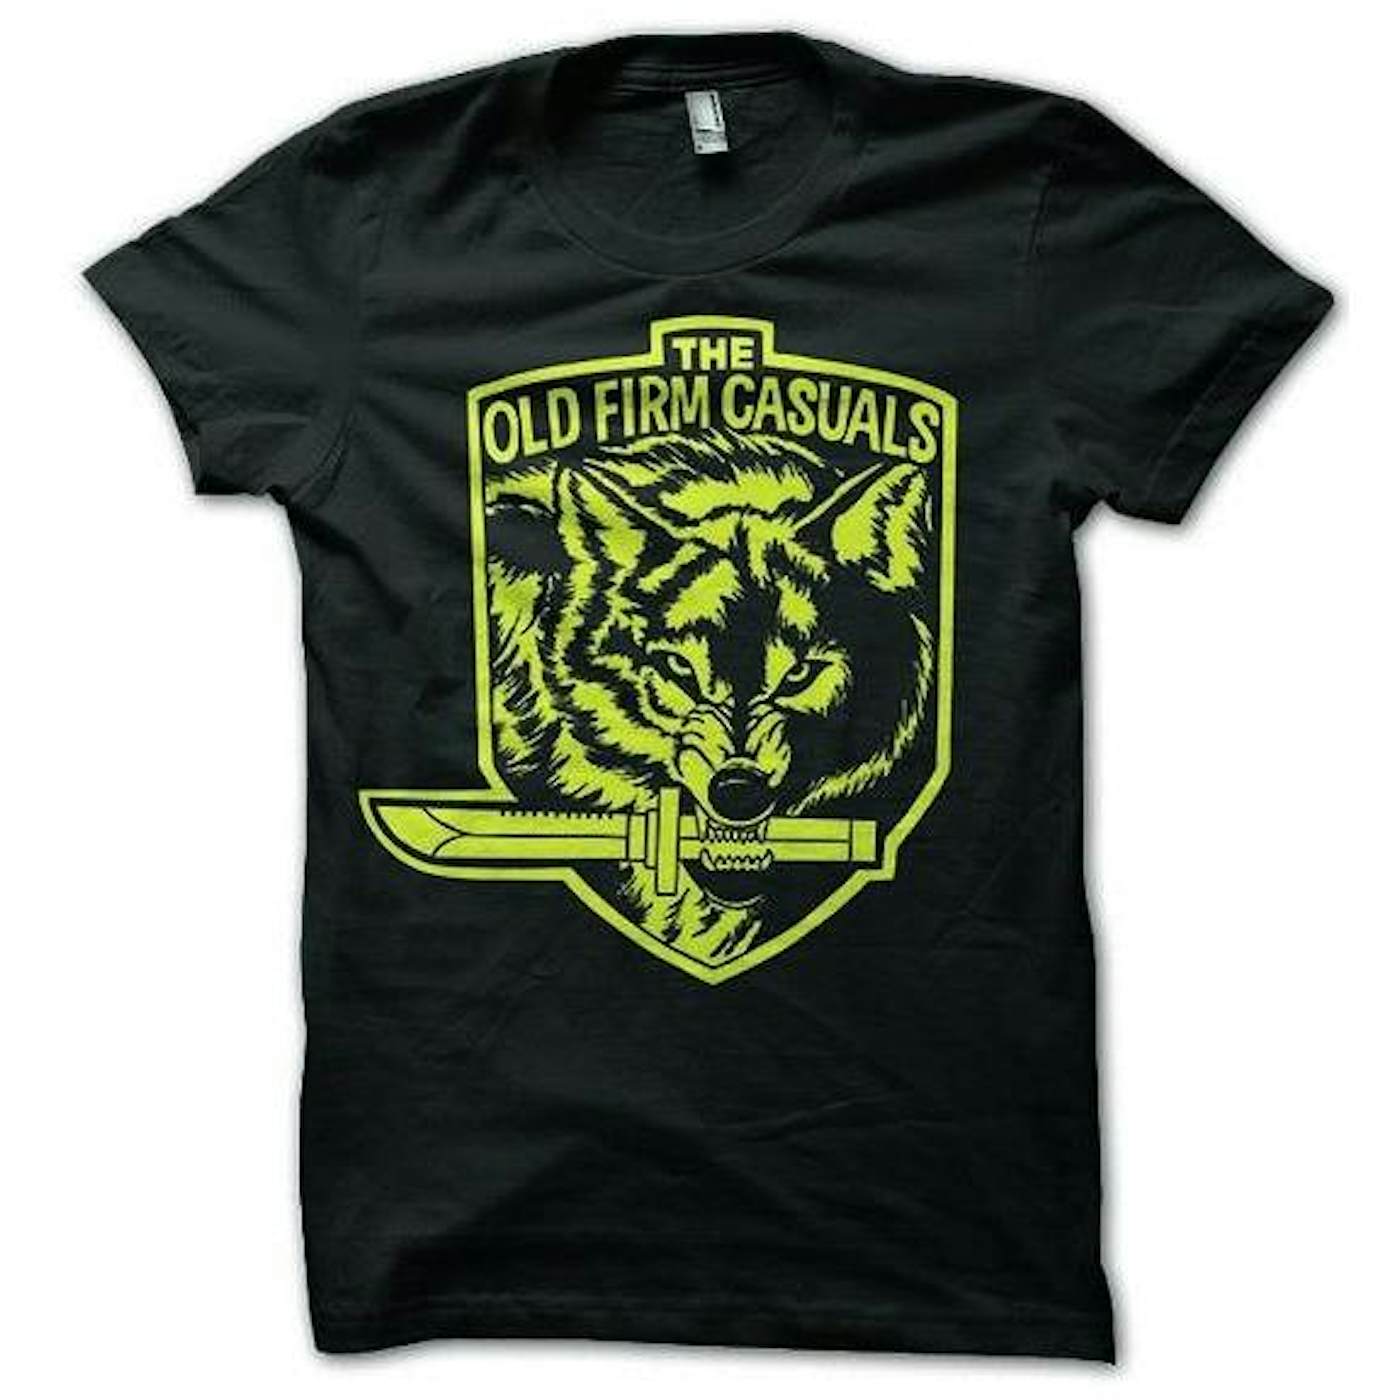 The Old Firm Casuals - Wolf Knife - Yellow on Black - T-Shirt